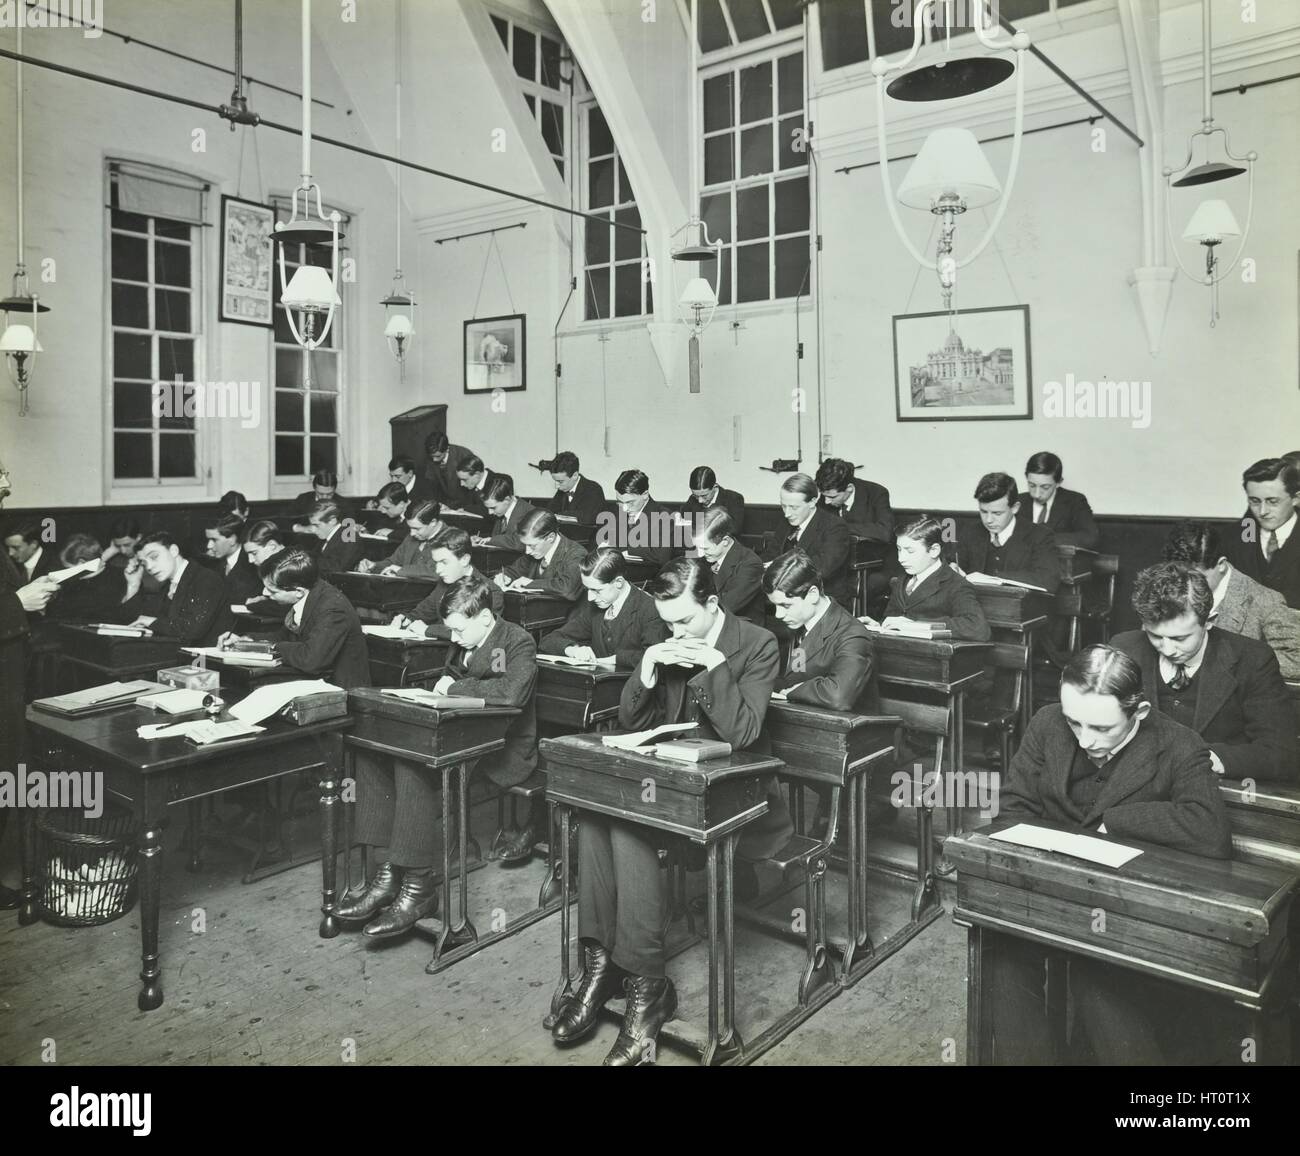 Civil Service class for male students, Hammersmith Commercial Institute, London, 1913.  Artist: Unknown. Stock Photo